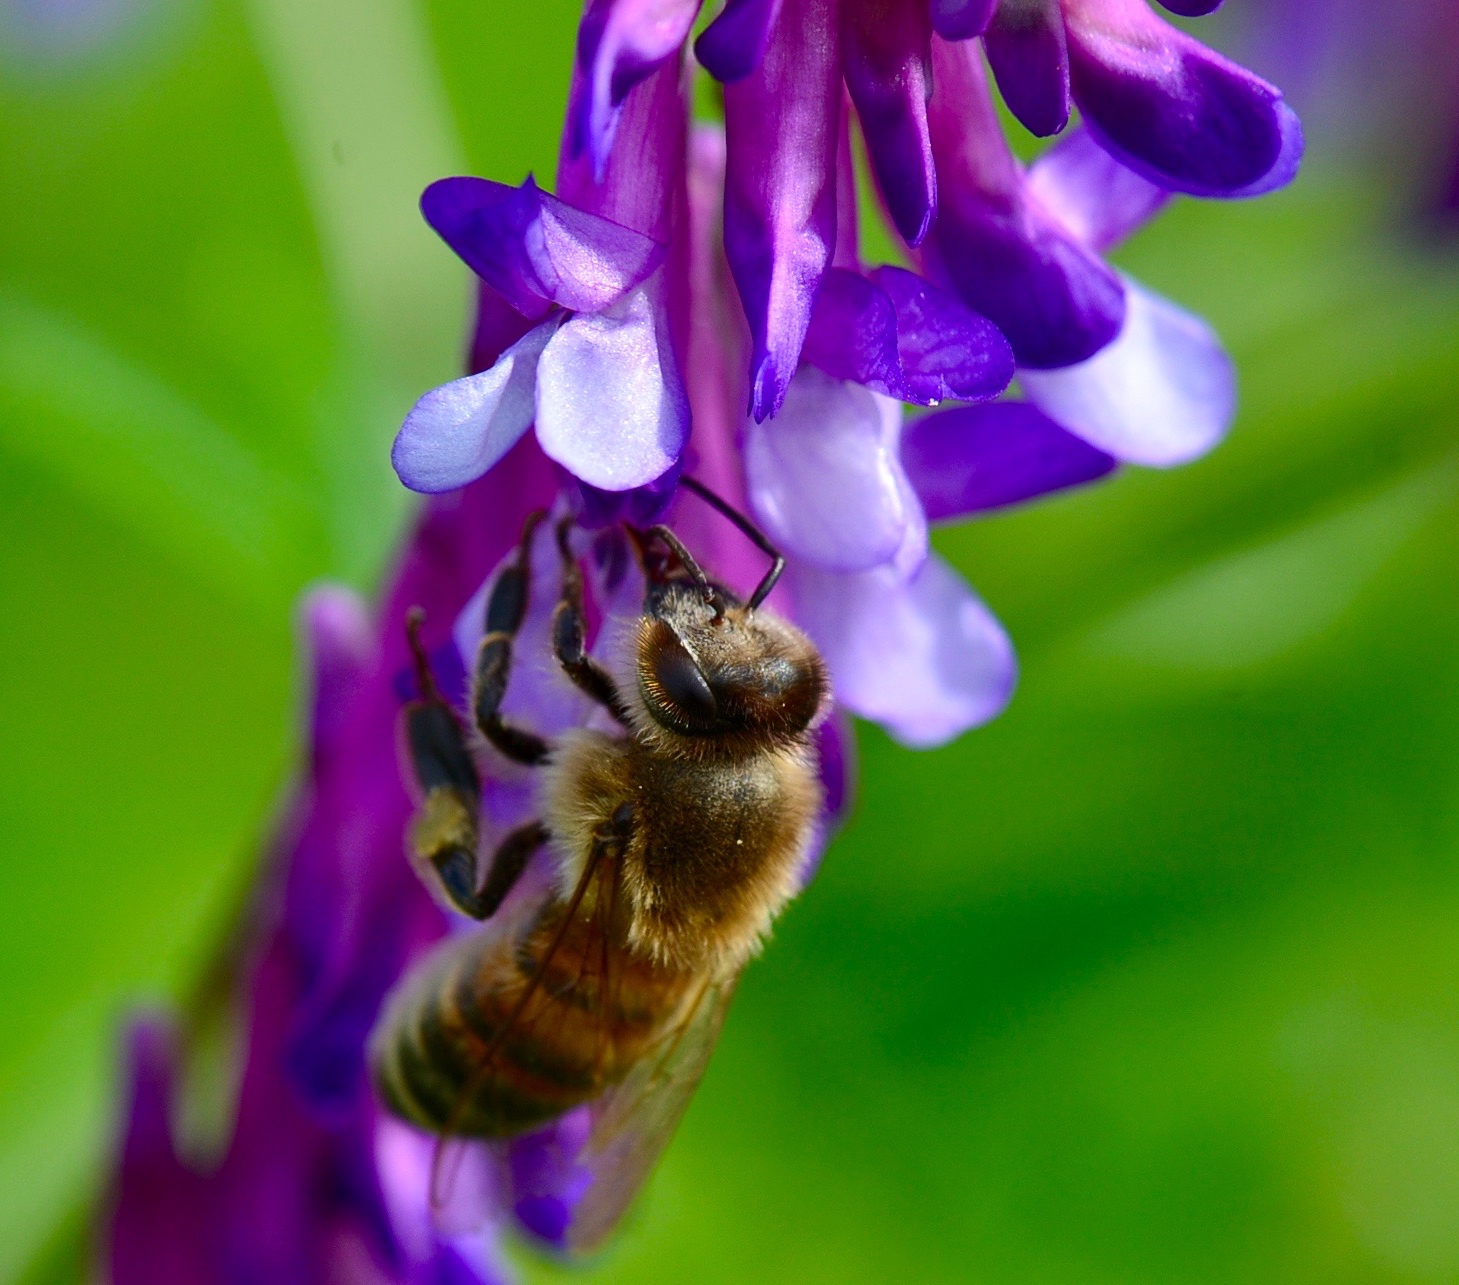 close-up of a bee on the purple petals of flowers